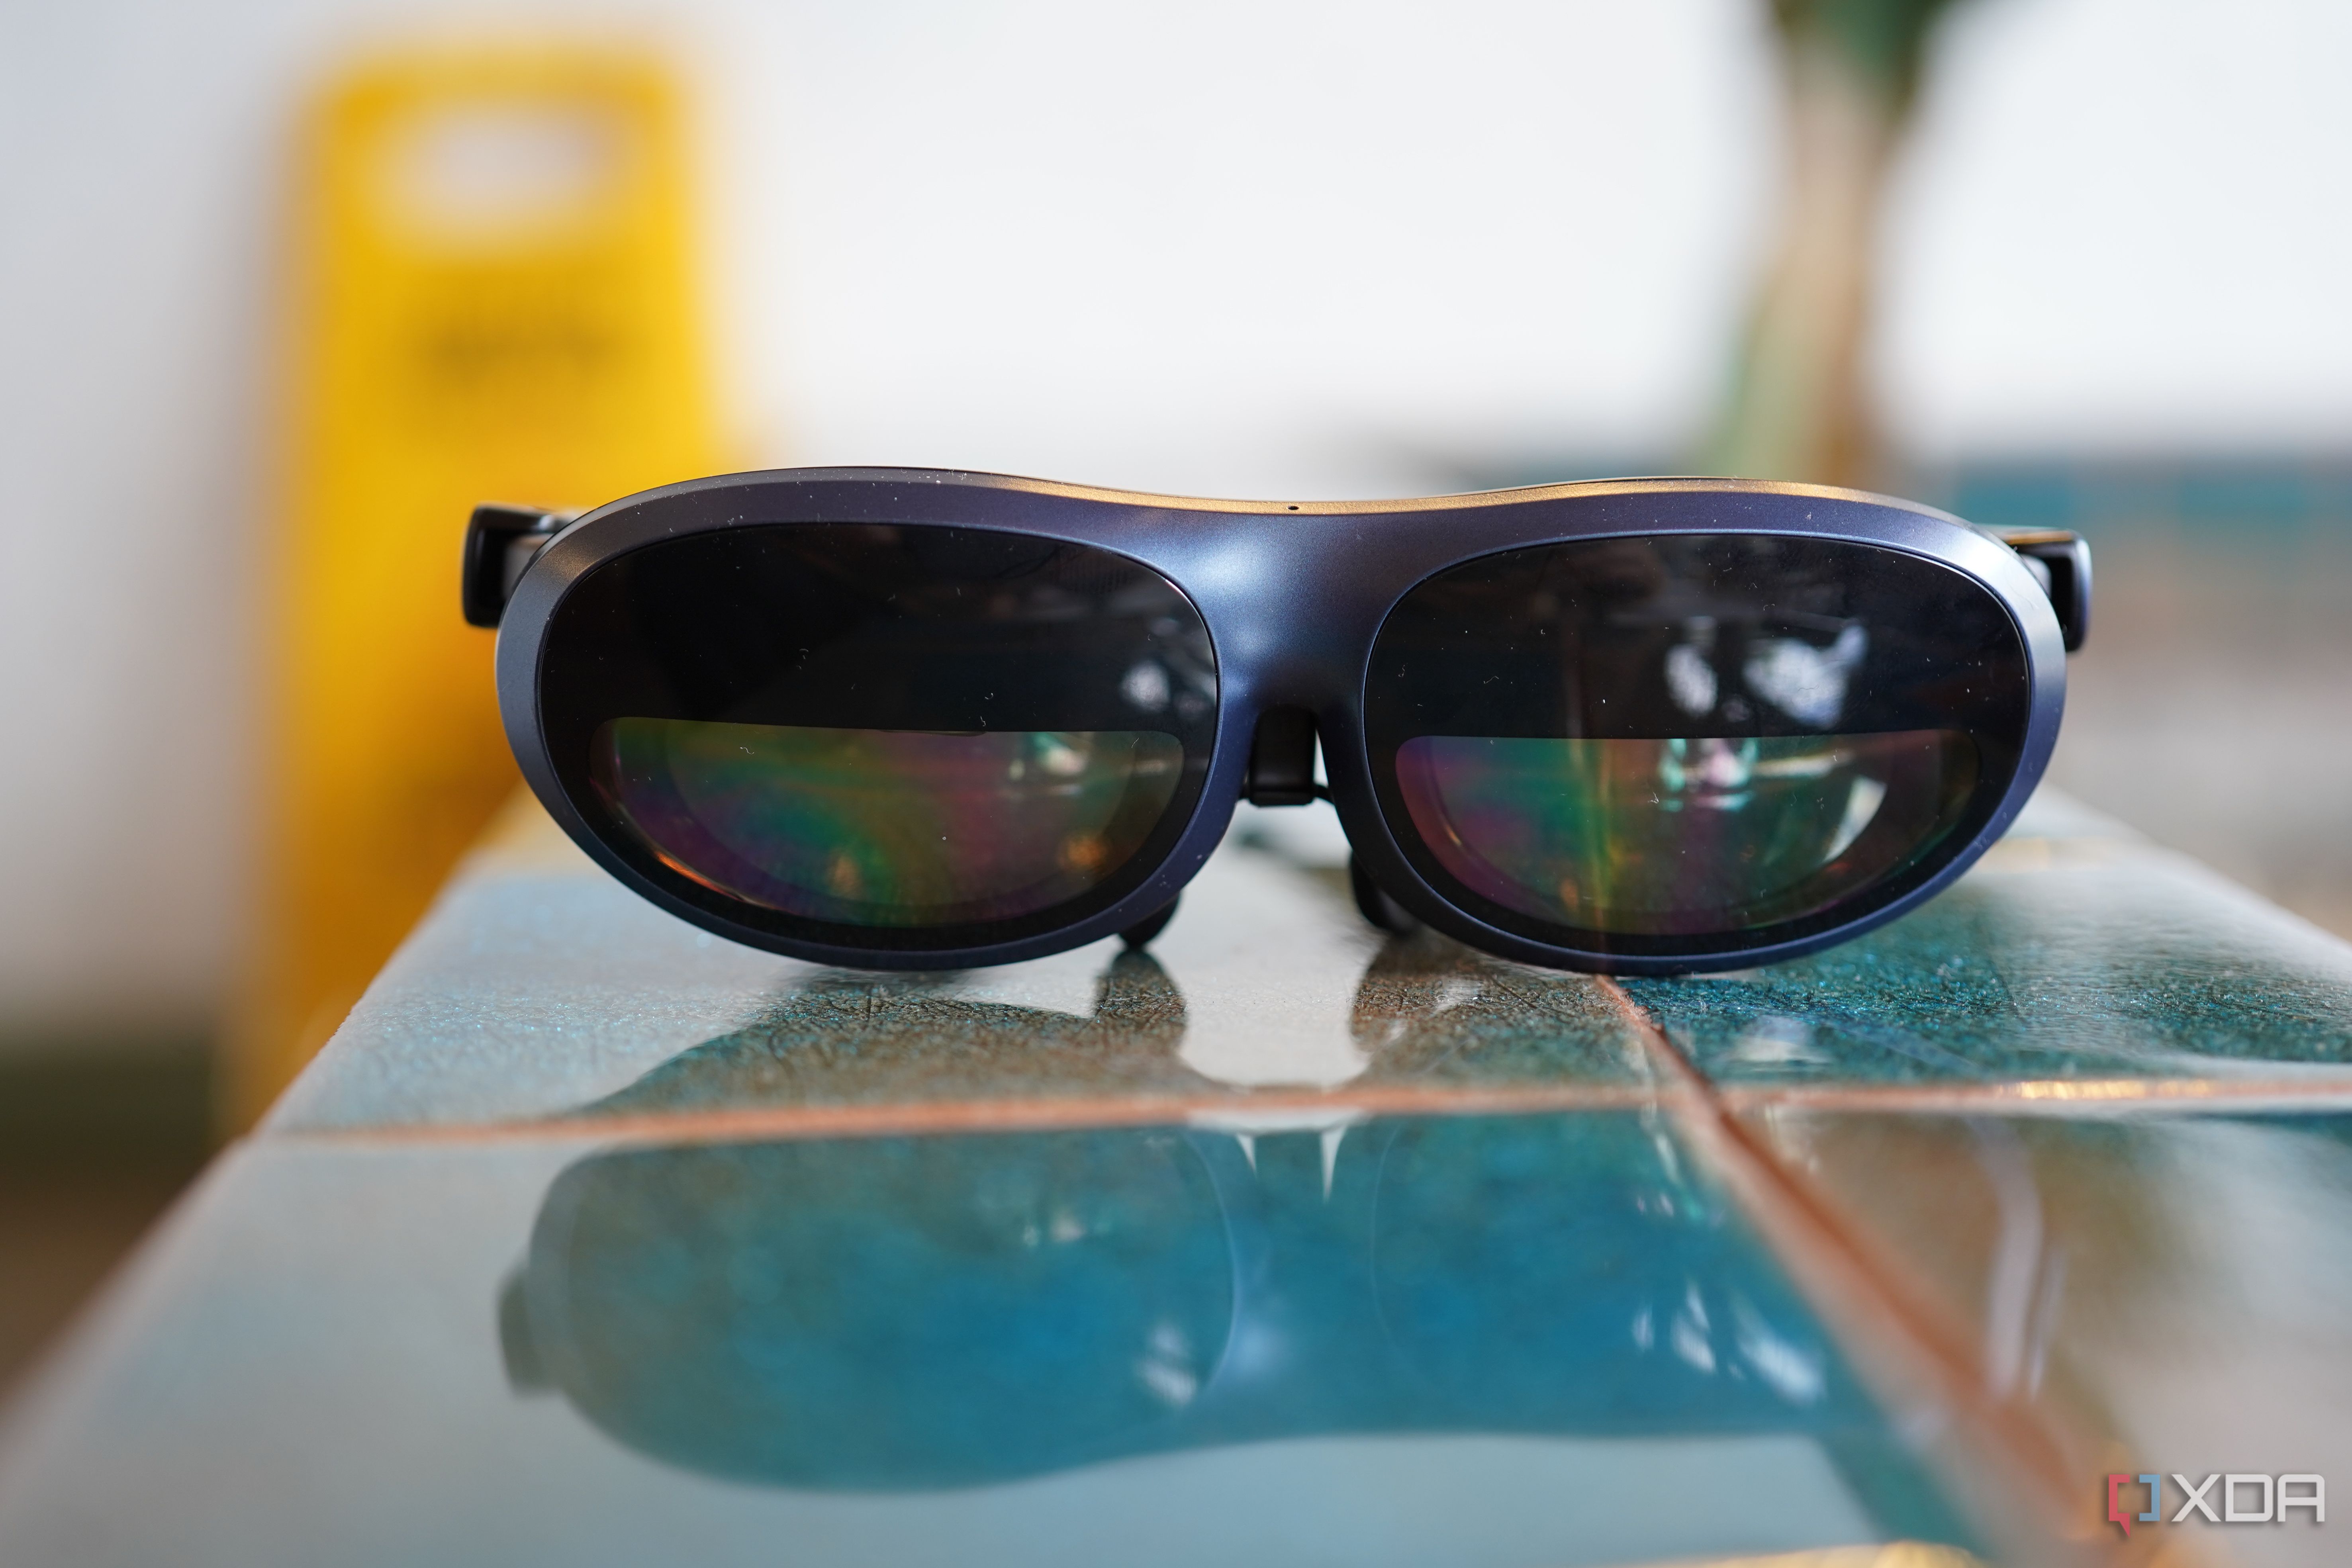 Lightweight AR glasses float a big screen in front of your eyes